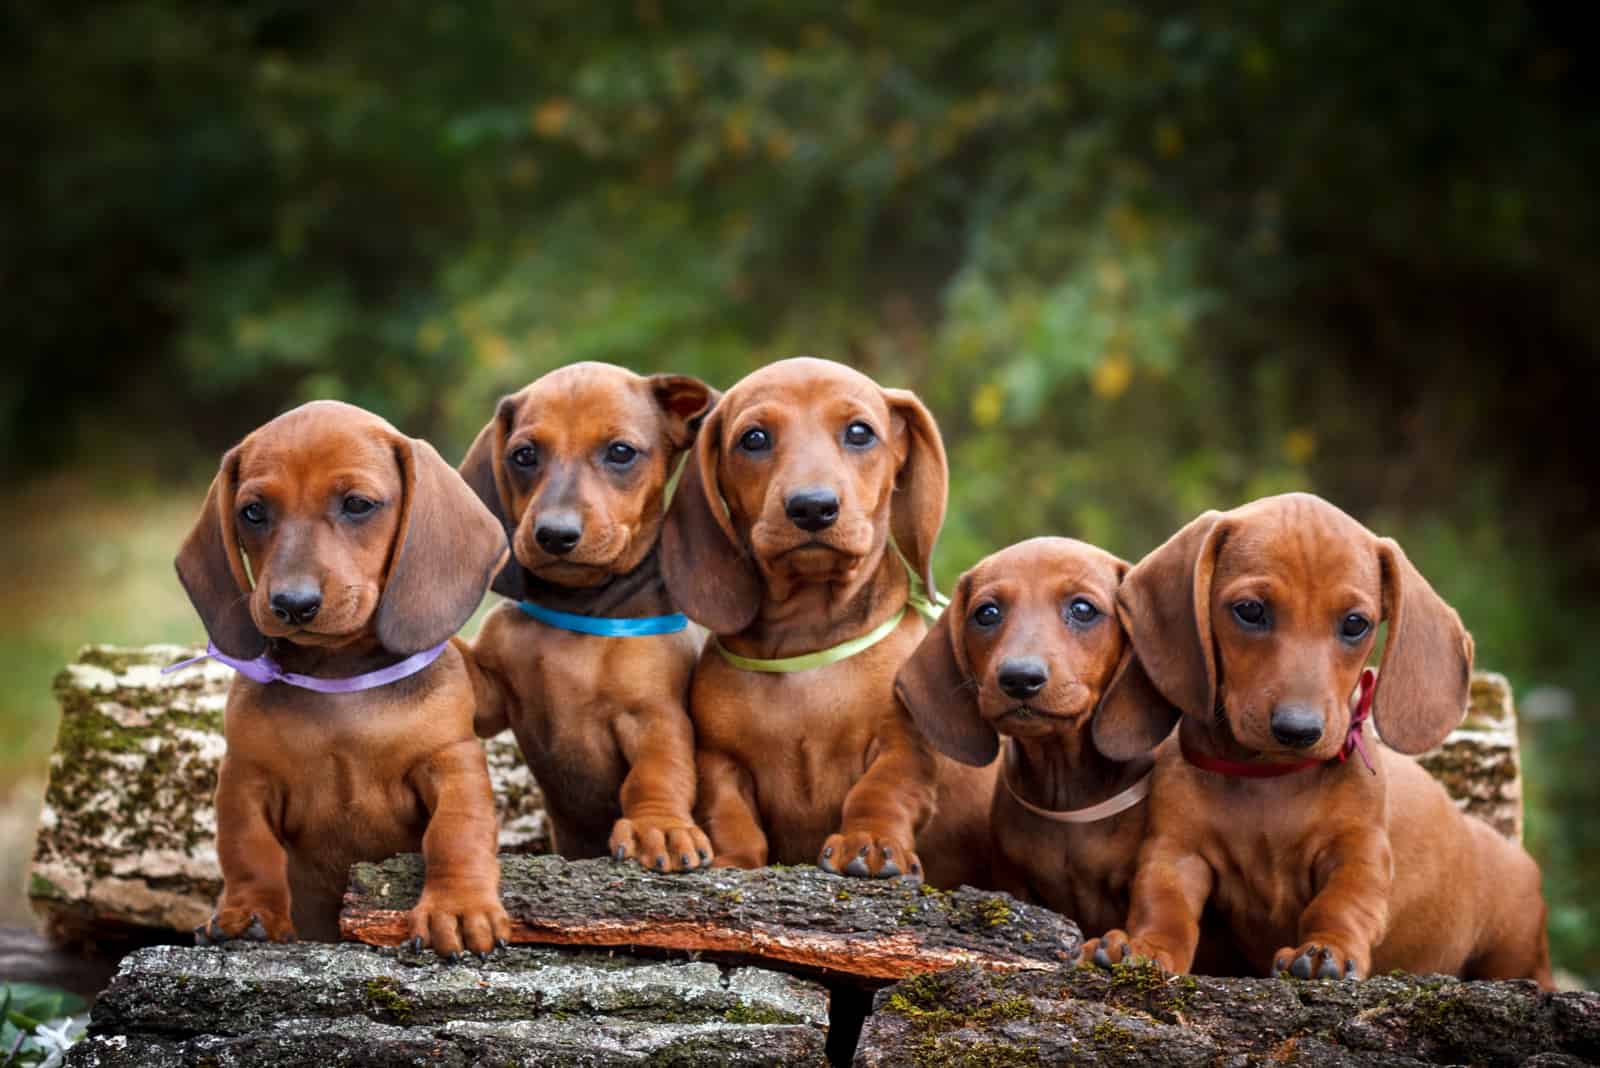 five adorable Dachshund puppies